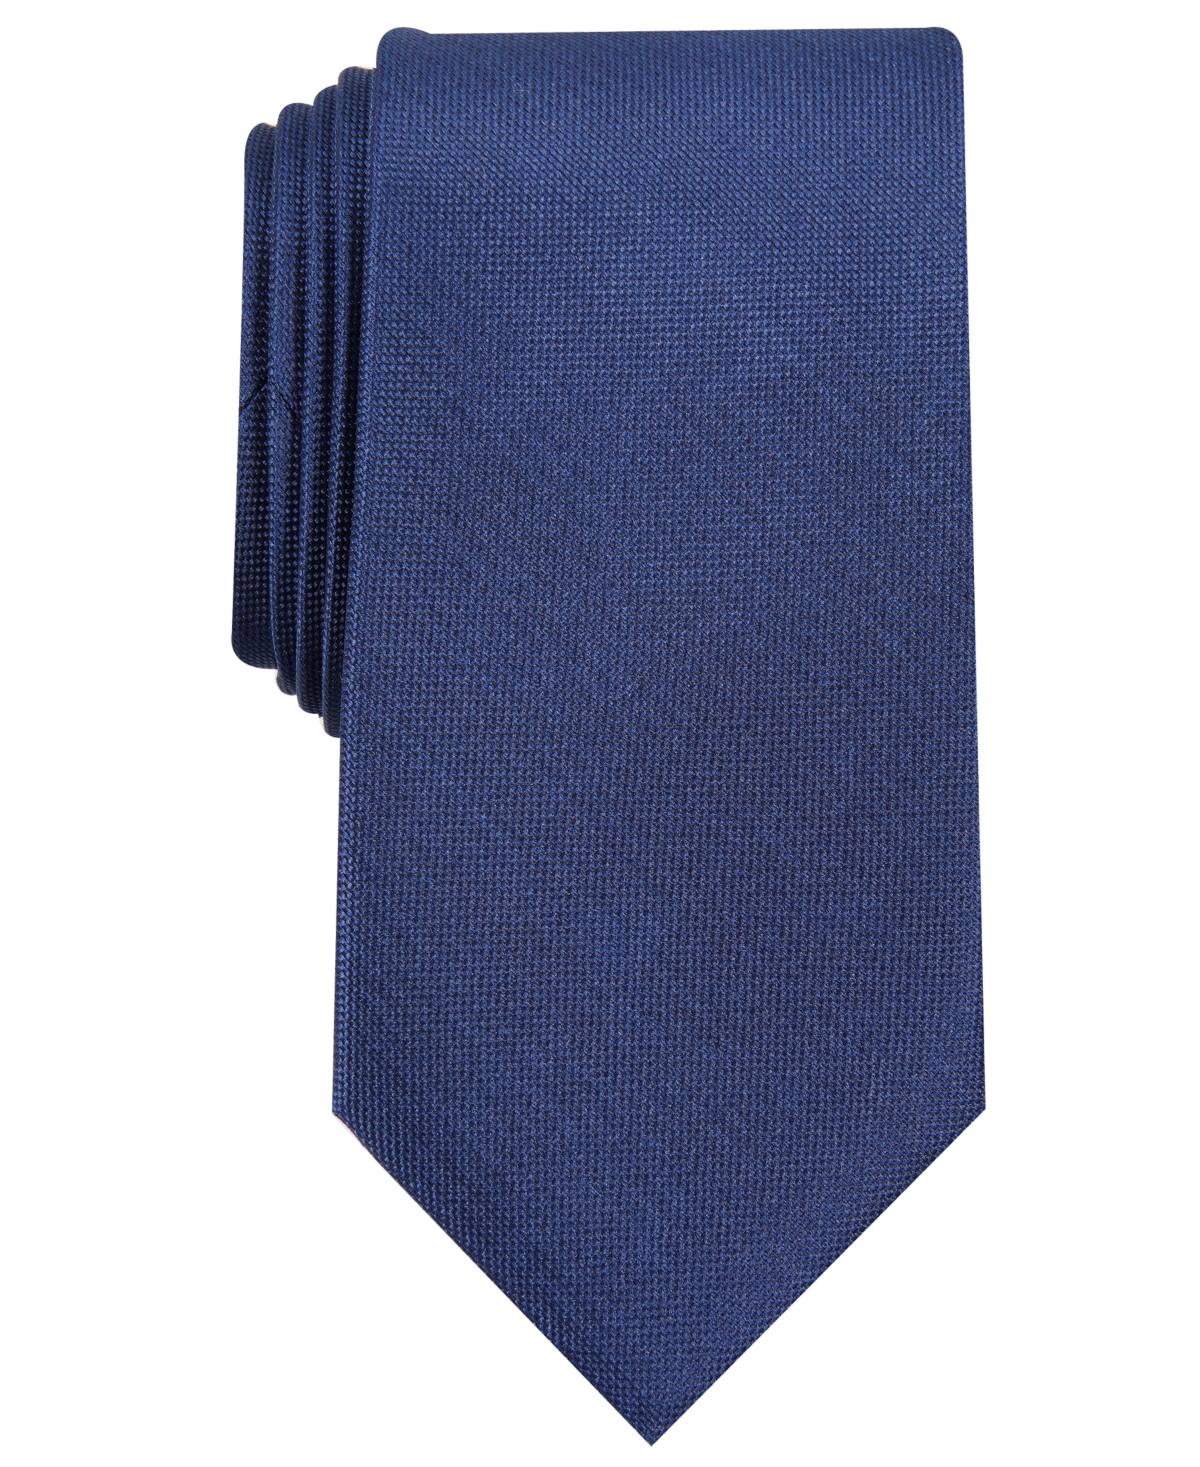 Men's Solid Tie, Created for Macy's - Yellow